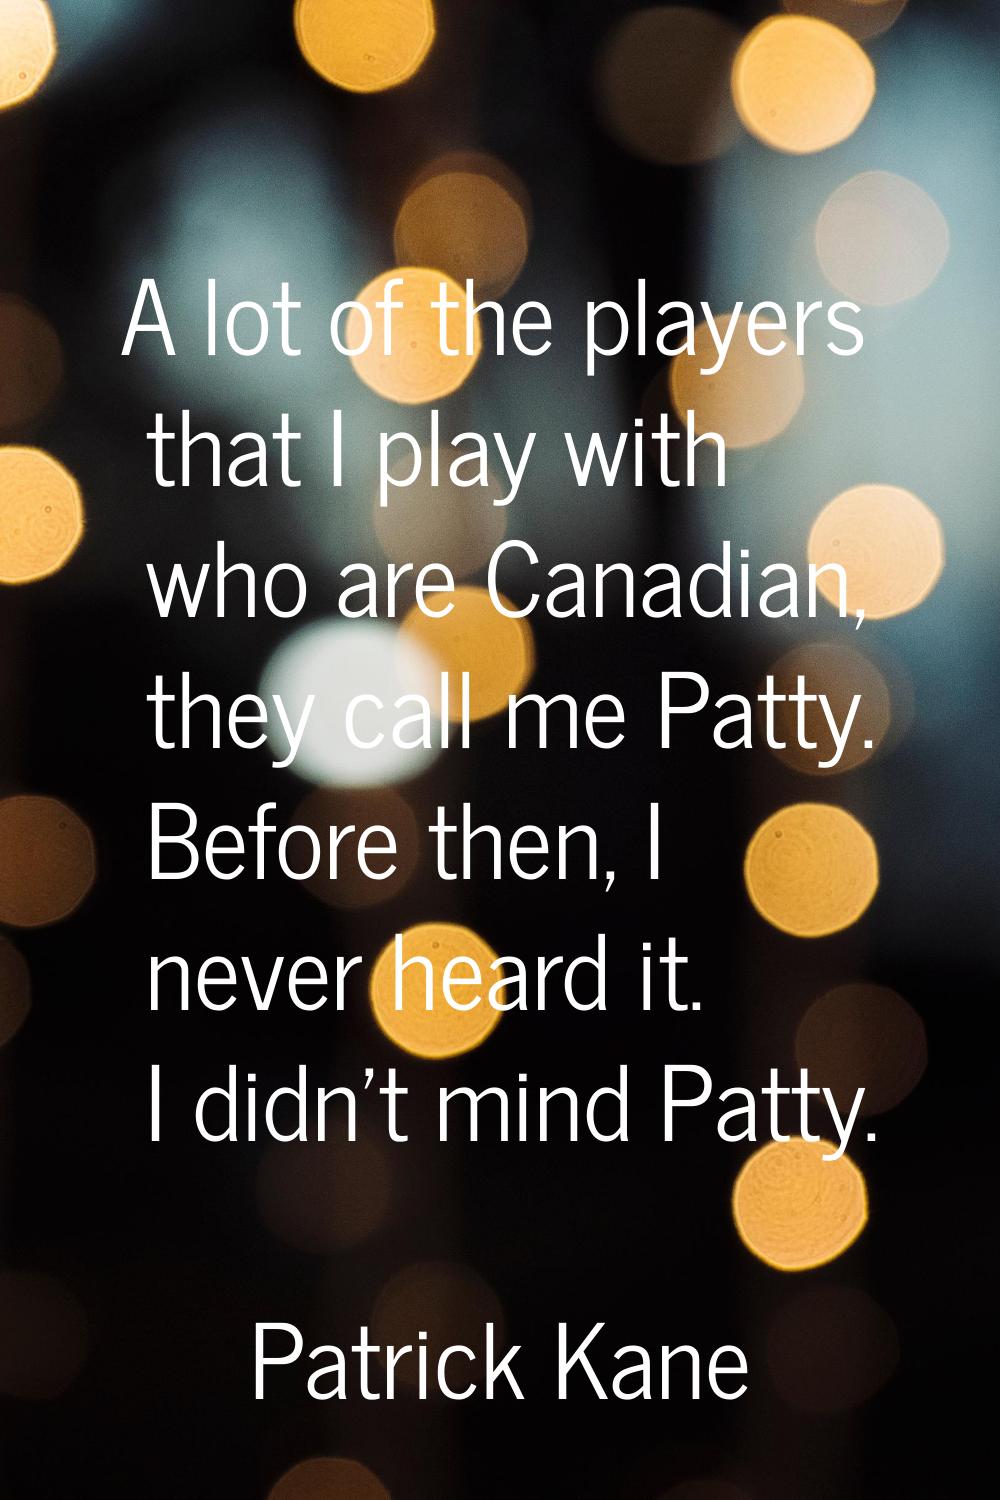 A lot of the players that I play with who are Canadian, they call me Patty. Before then, I never he